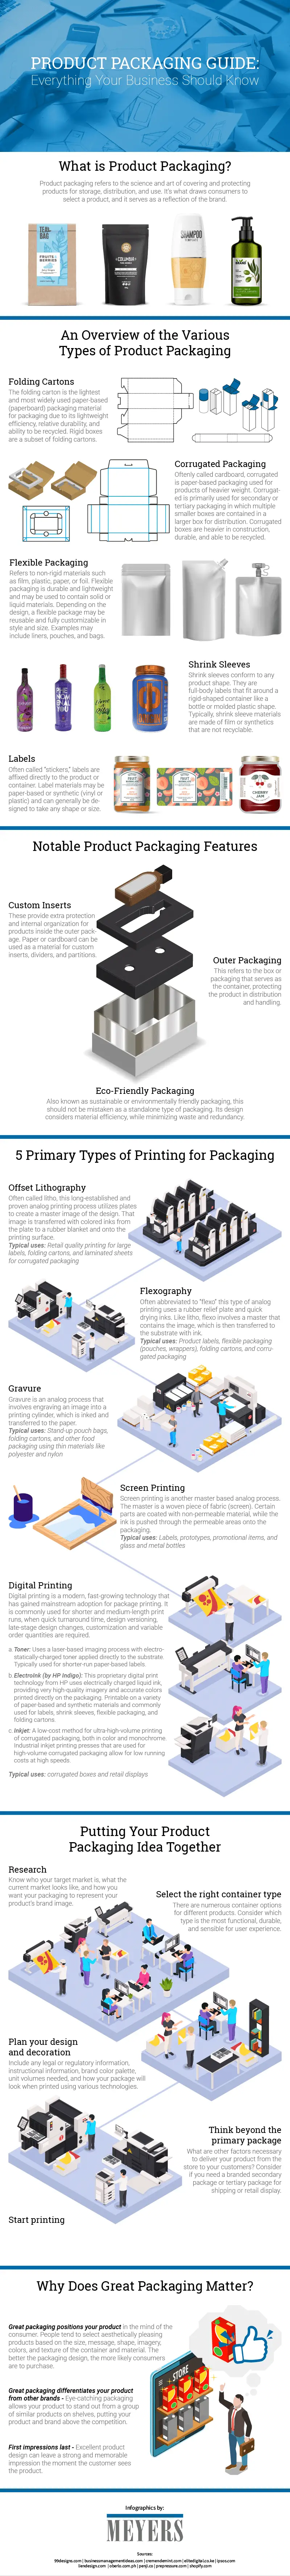 product-packaging-guide-infographic.png